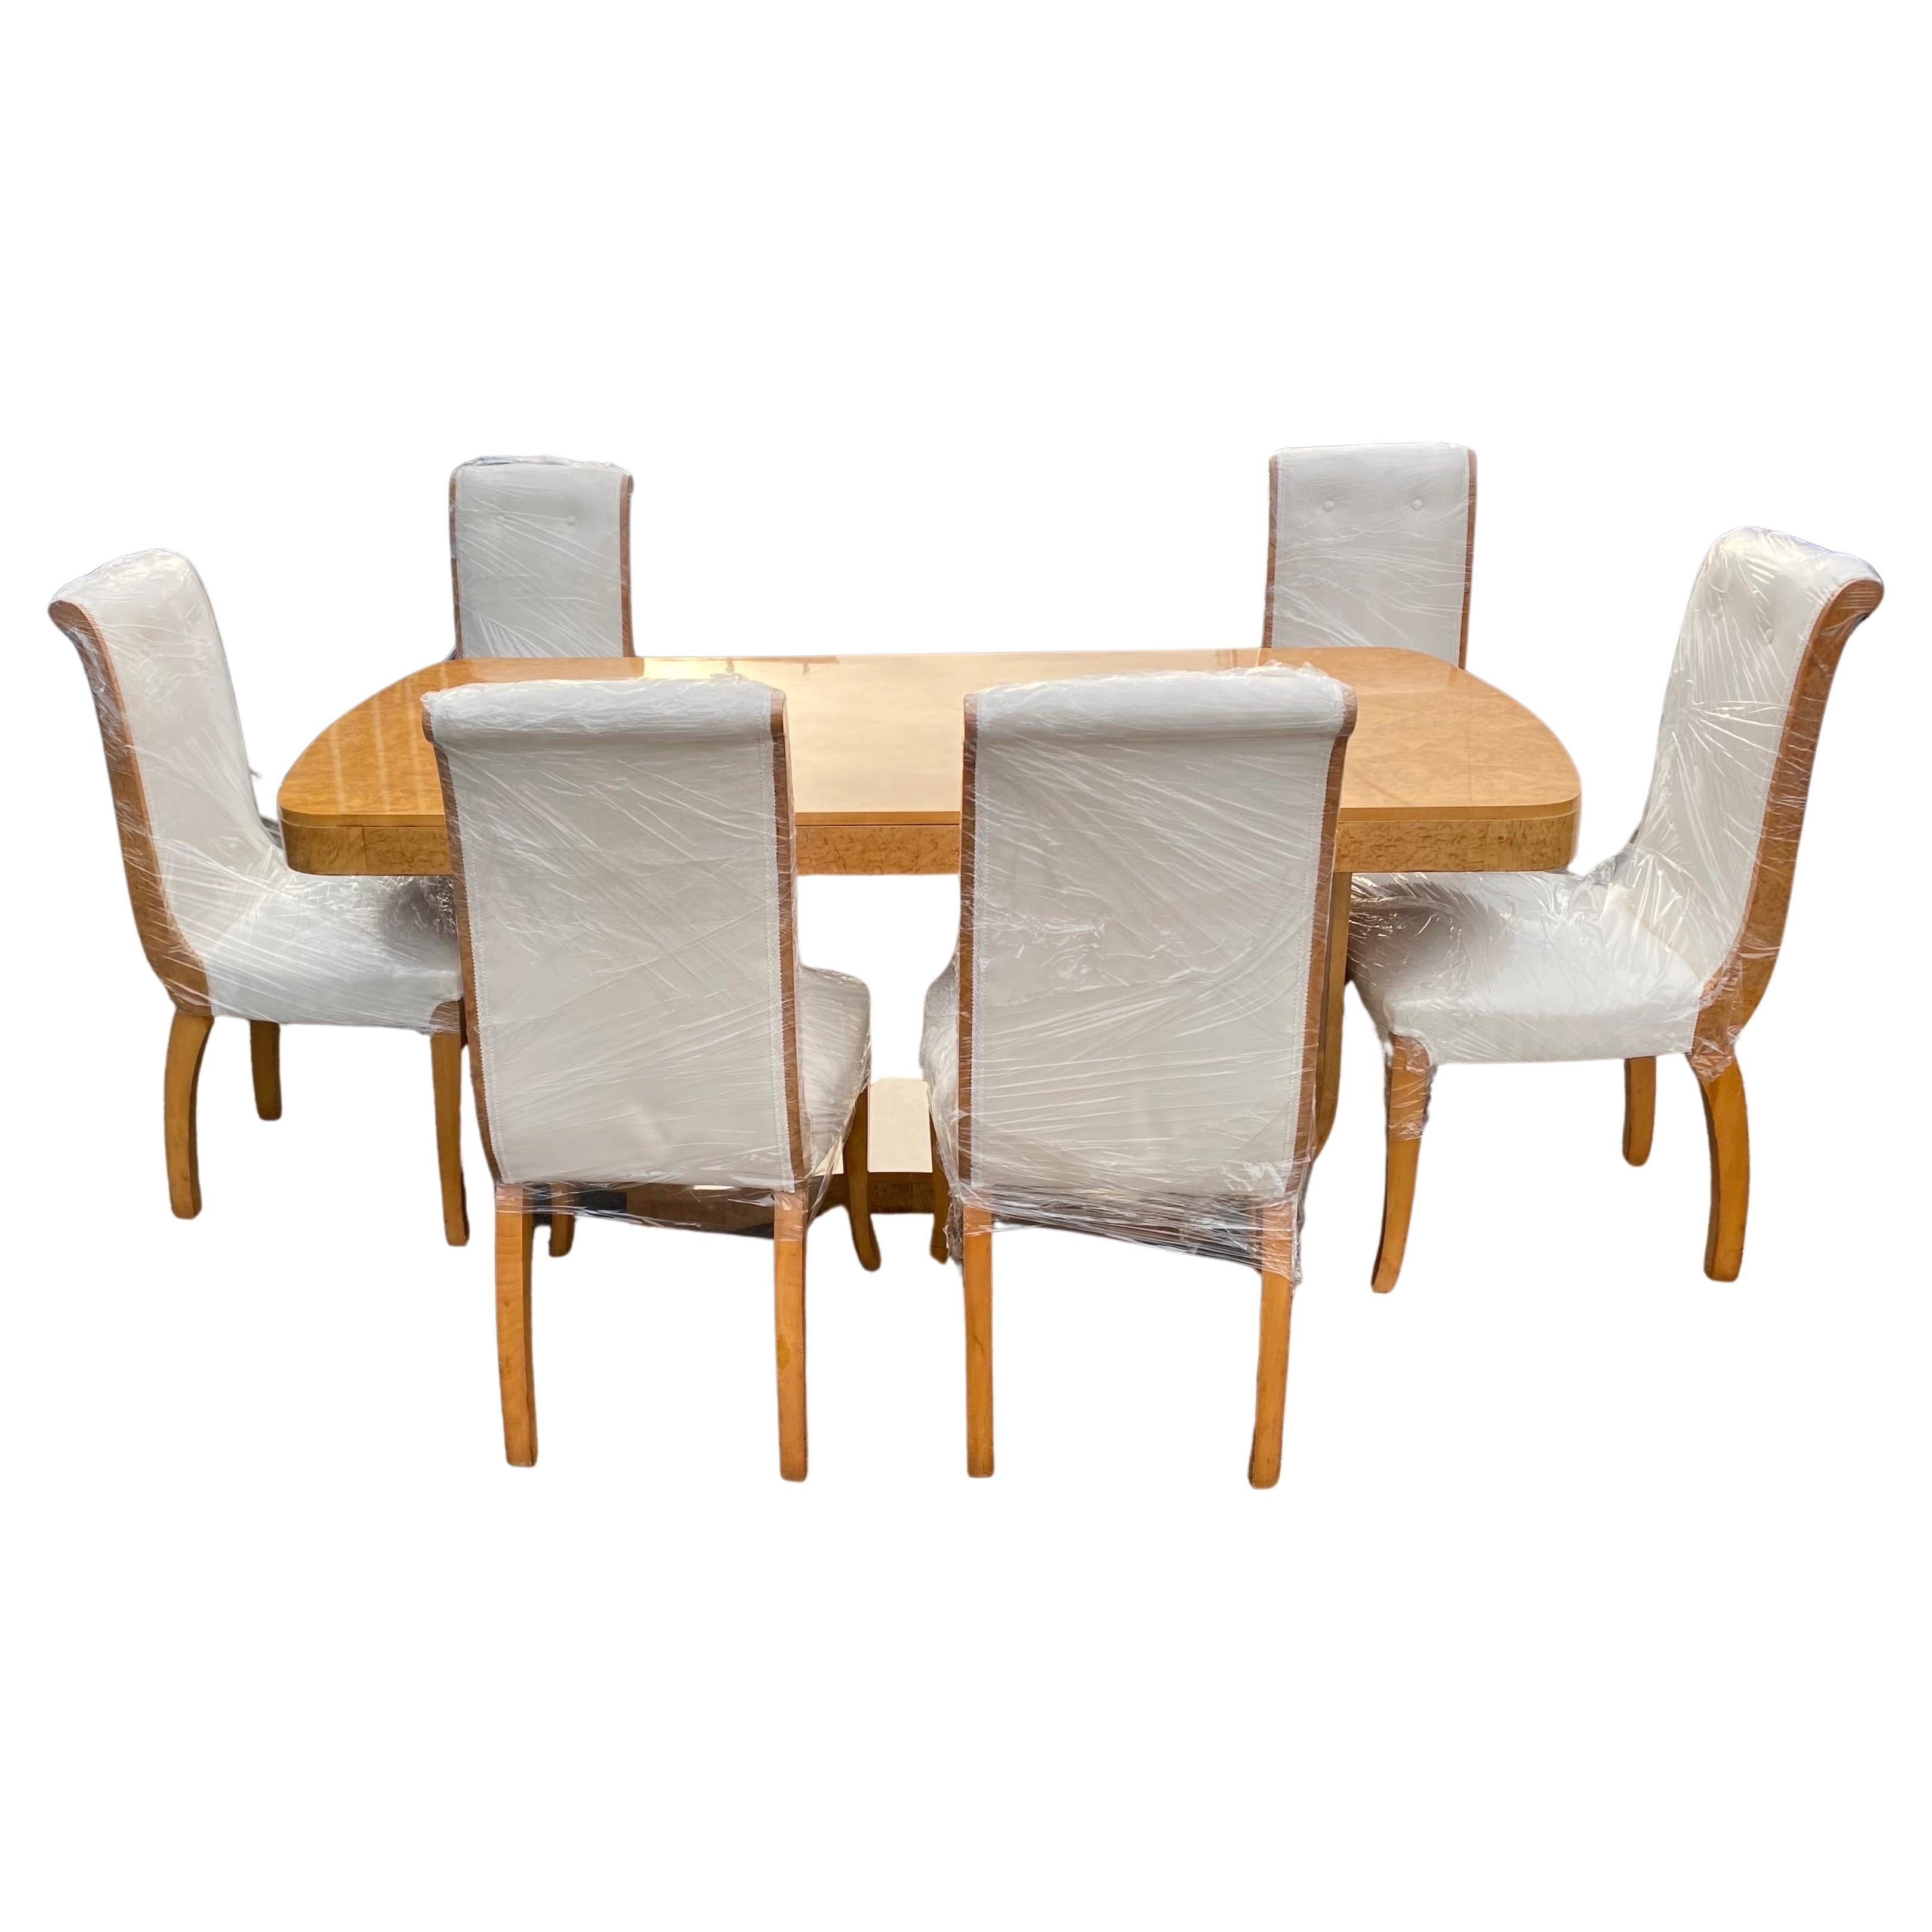 An original art deco Harry & Lou Epstein blonde wood dining Suite. 
A high quality Burr Maple Veneer set comprises of a stunning u shape base table with canted corner shaped top with protective glass and 6 beautiful Scroll Back Chairs. The matching